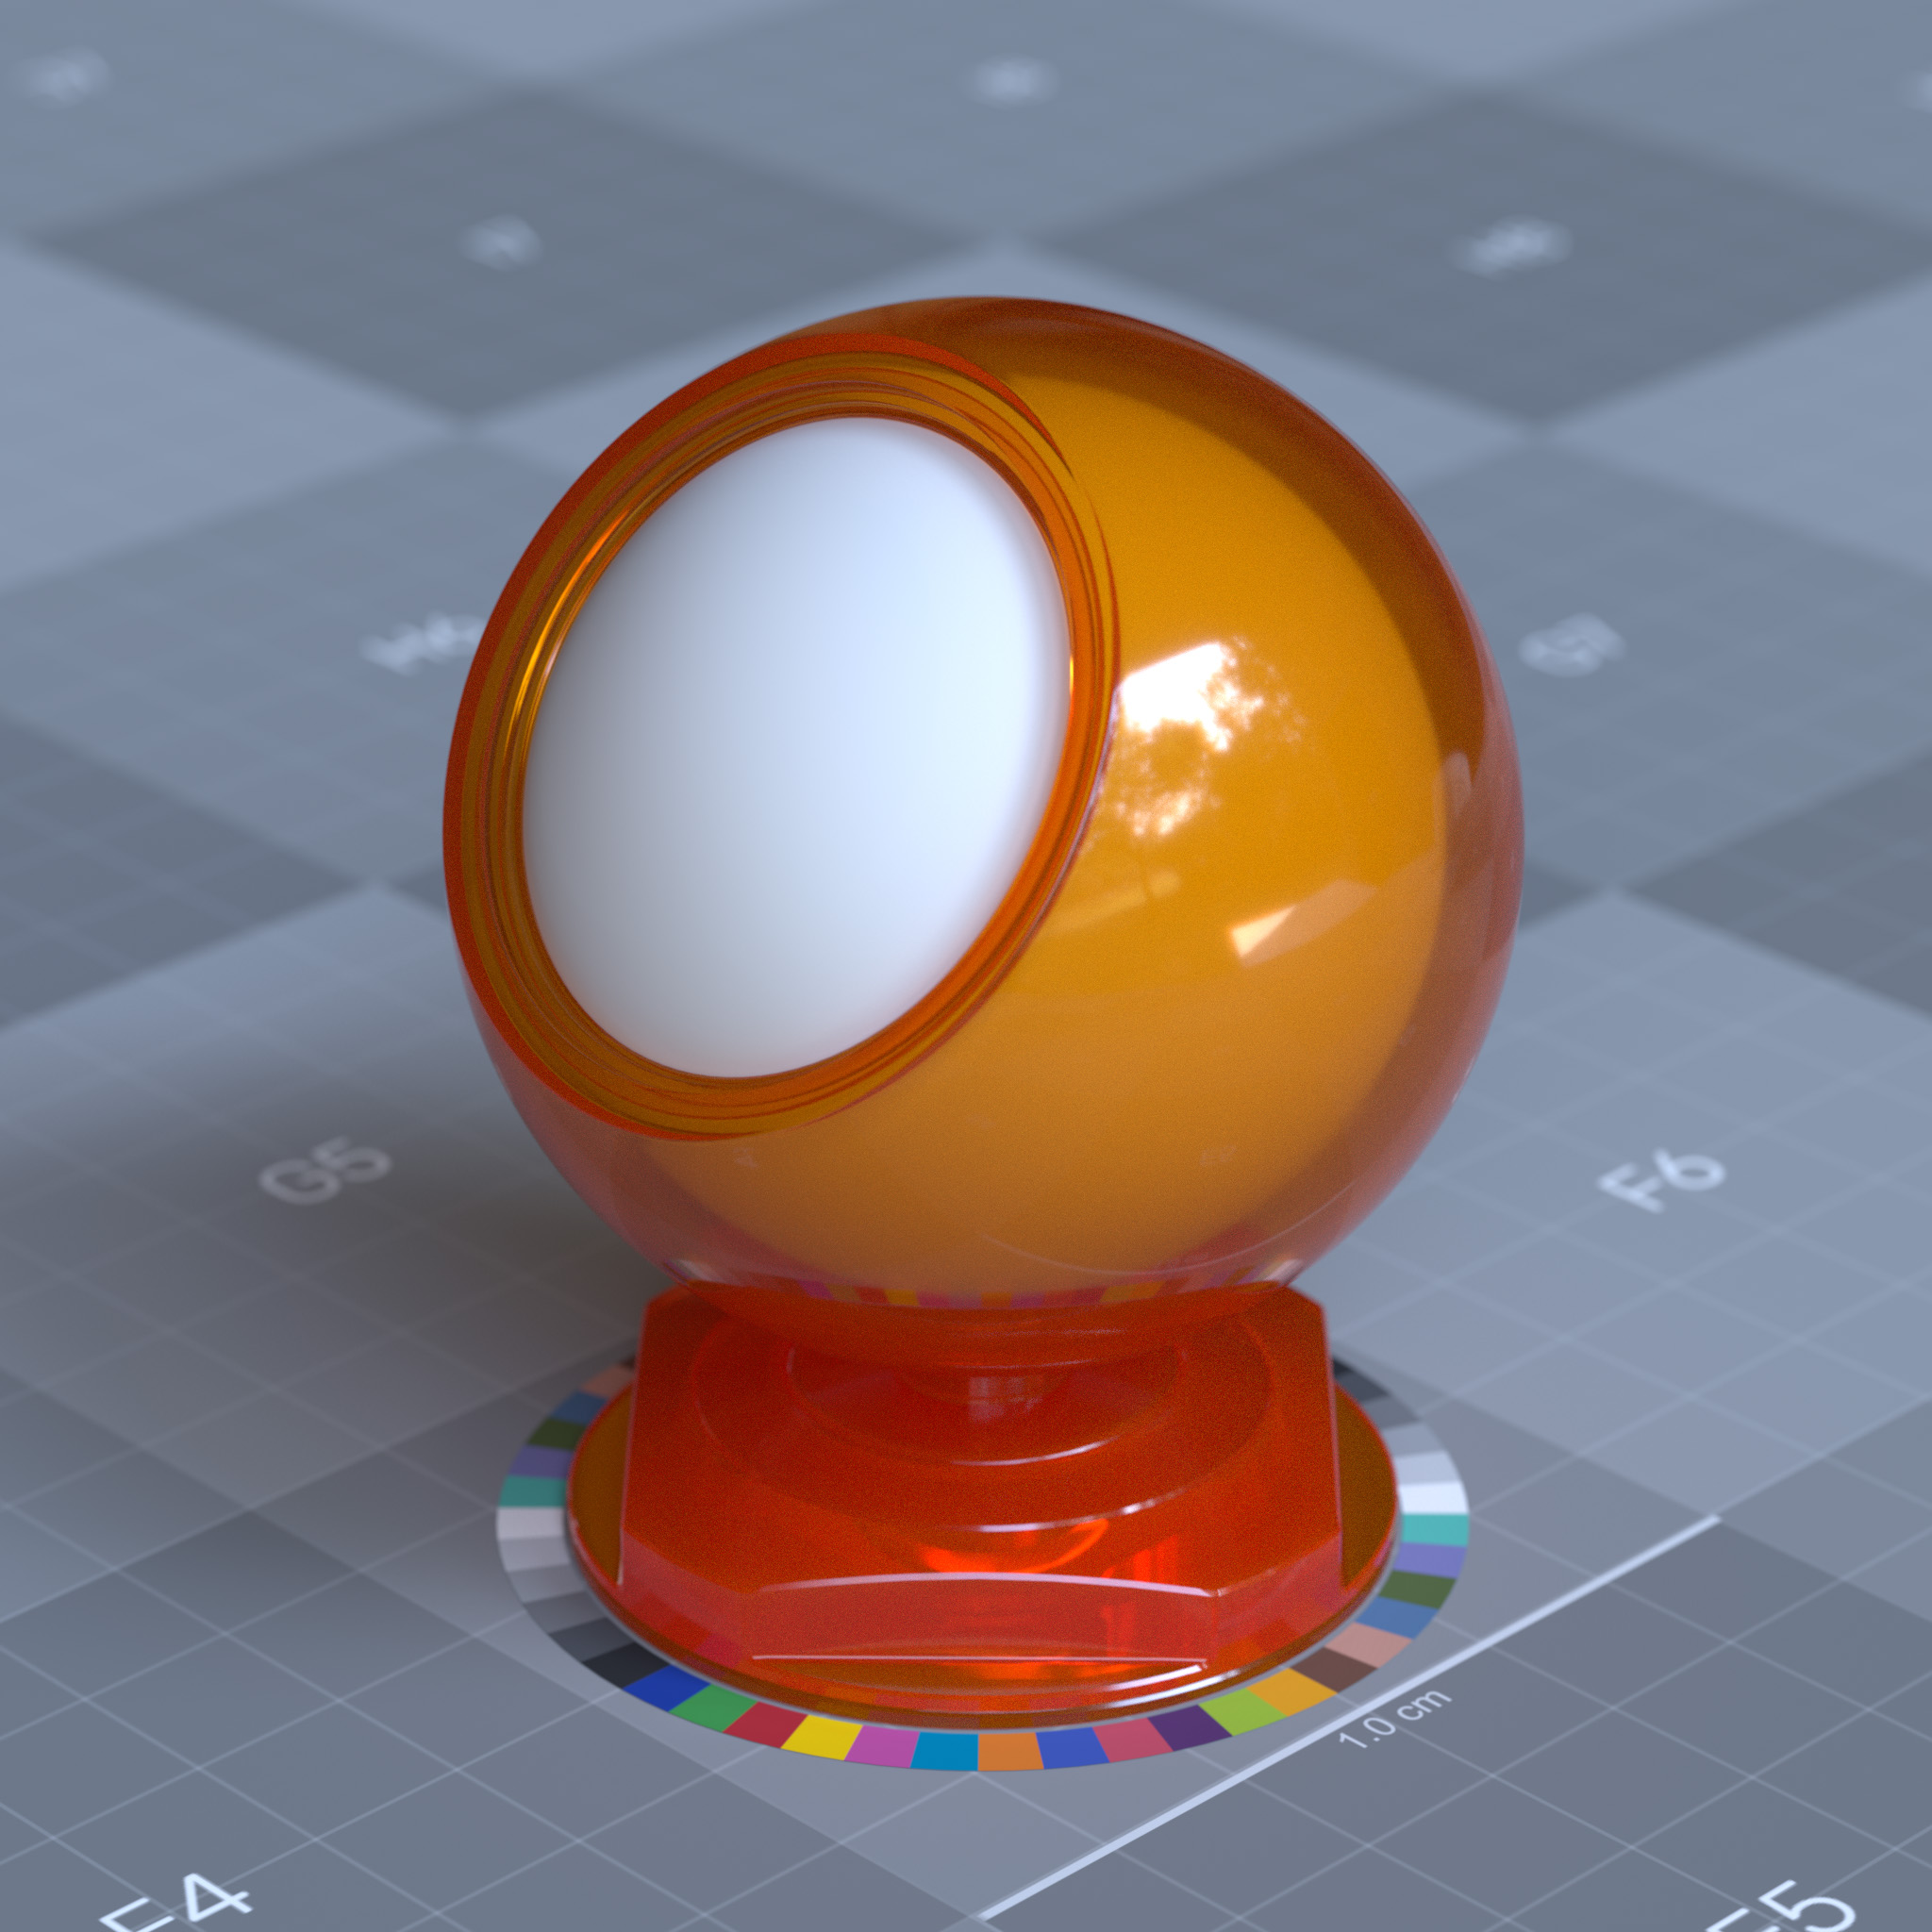 rtx_material_omnisurfacebase_specular_transmission_scatter_0p3_0p05_0p0